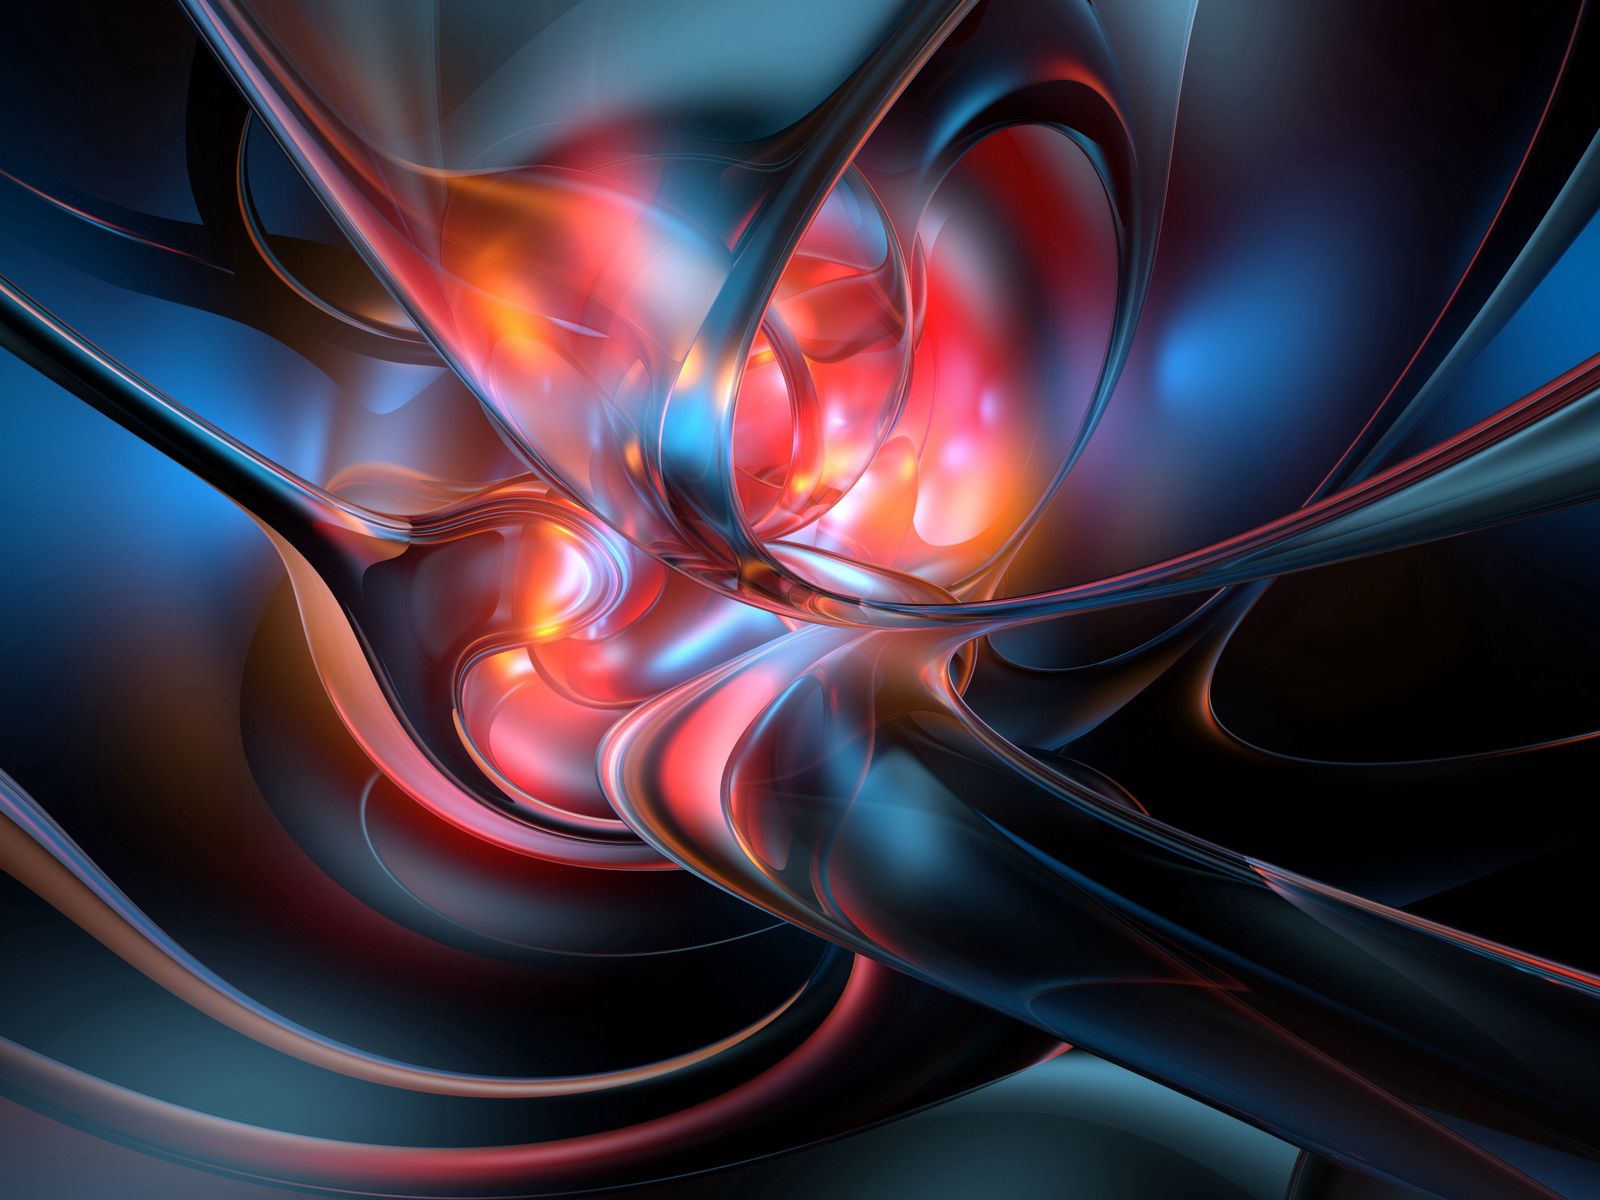 Download wallpaper x abstract blue red spiral standard hd background